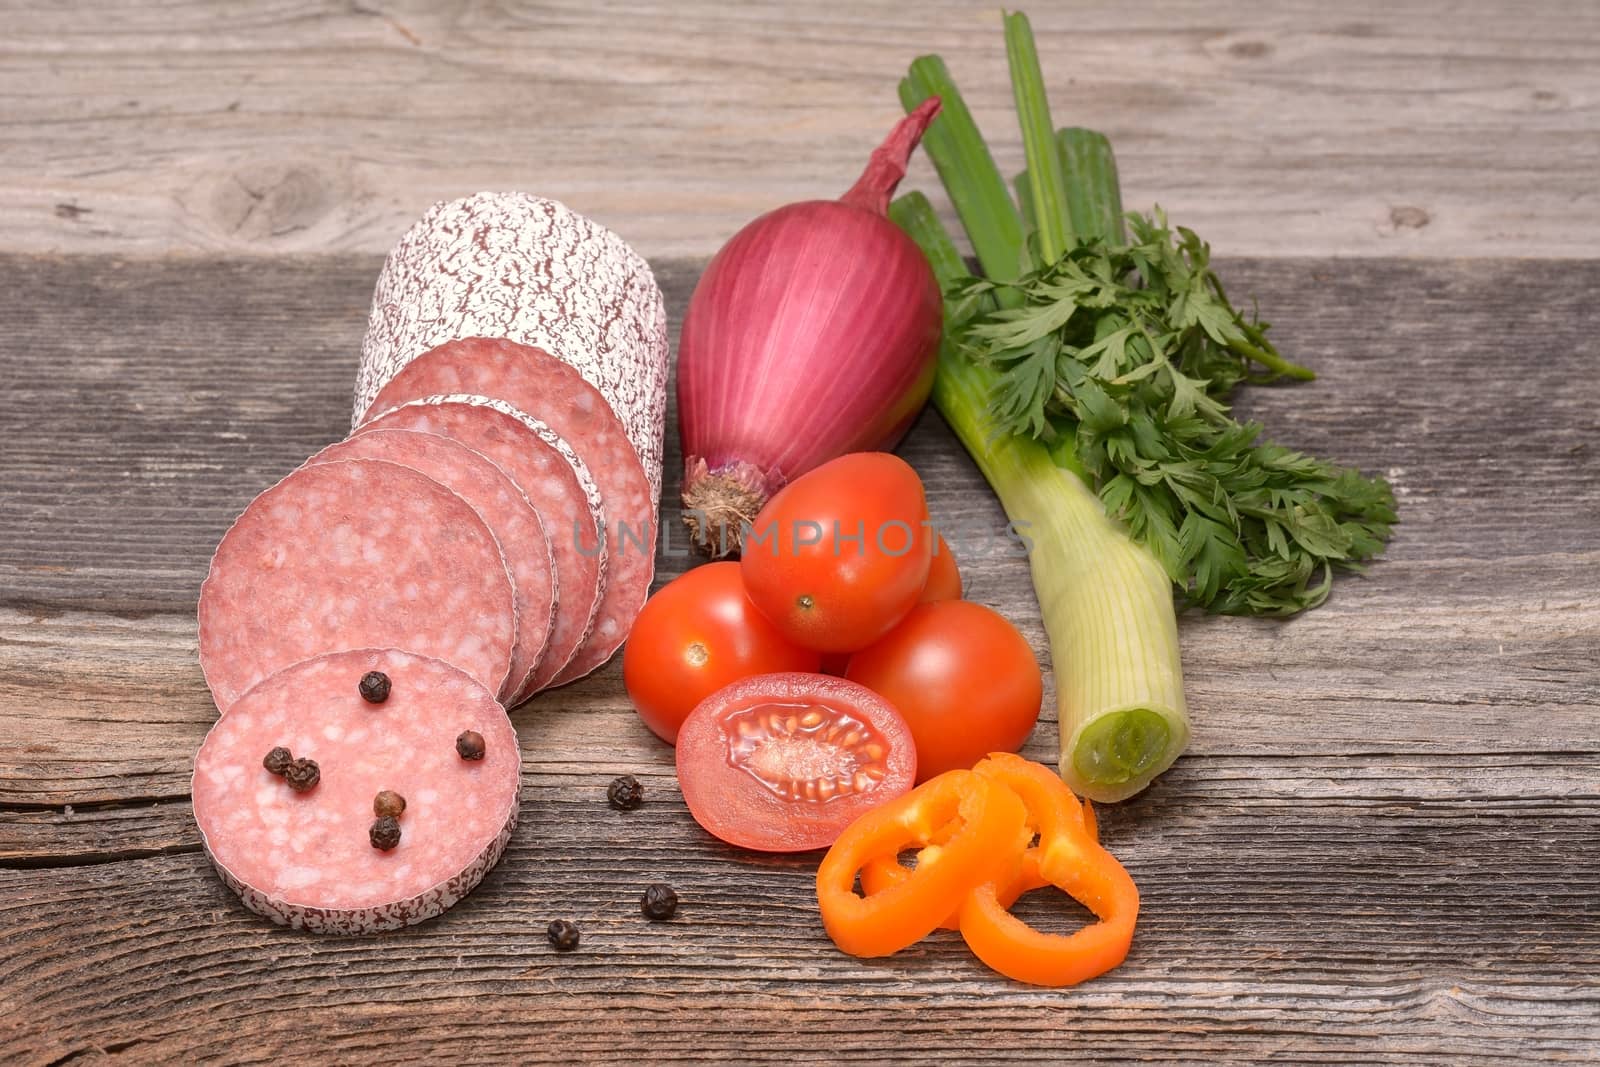 processed meat products with vegetables by comet